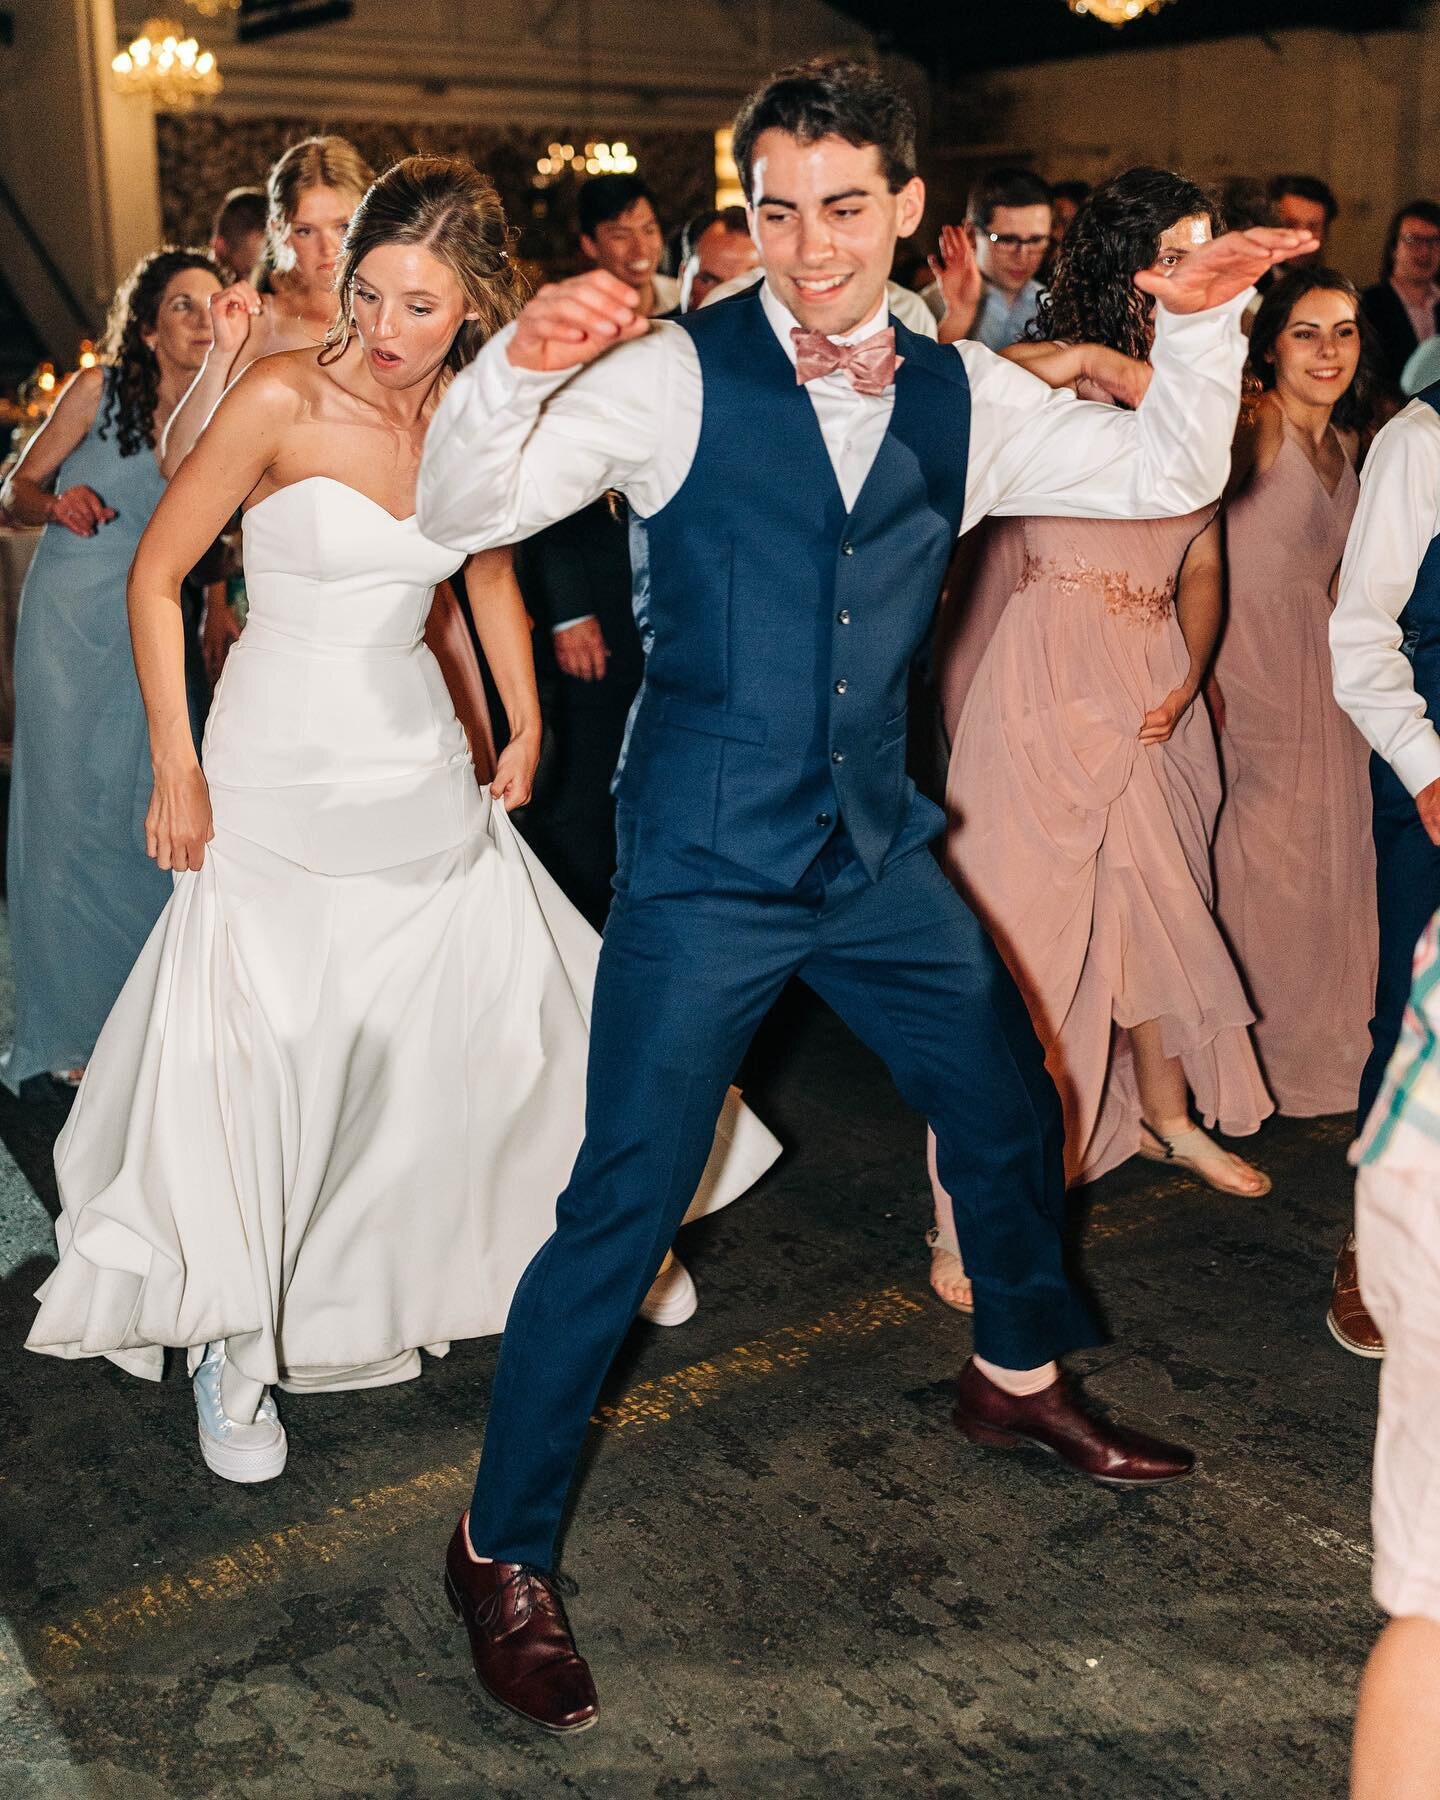 Seriously make it out to the dance floor when you go to a wedding, the guests are what makes this time. Throw all fears of dancing out the window! No body cares how coordinated you are or aren&rsquo;t! The bride and groom are just thankful your busti